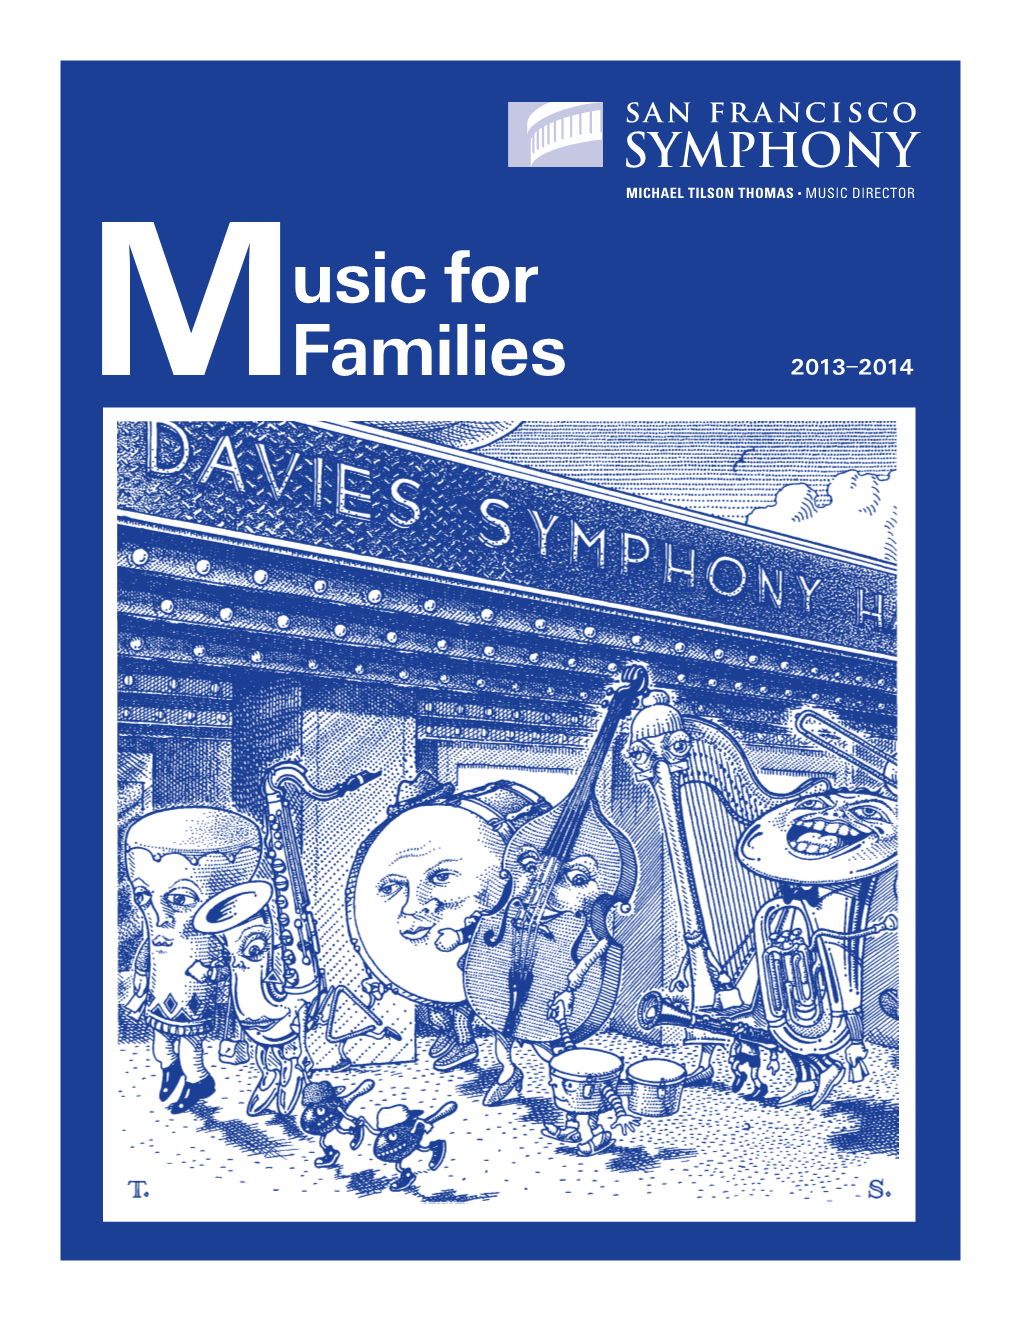 Usic for Families Your Concert Dates